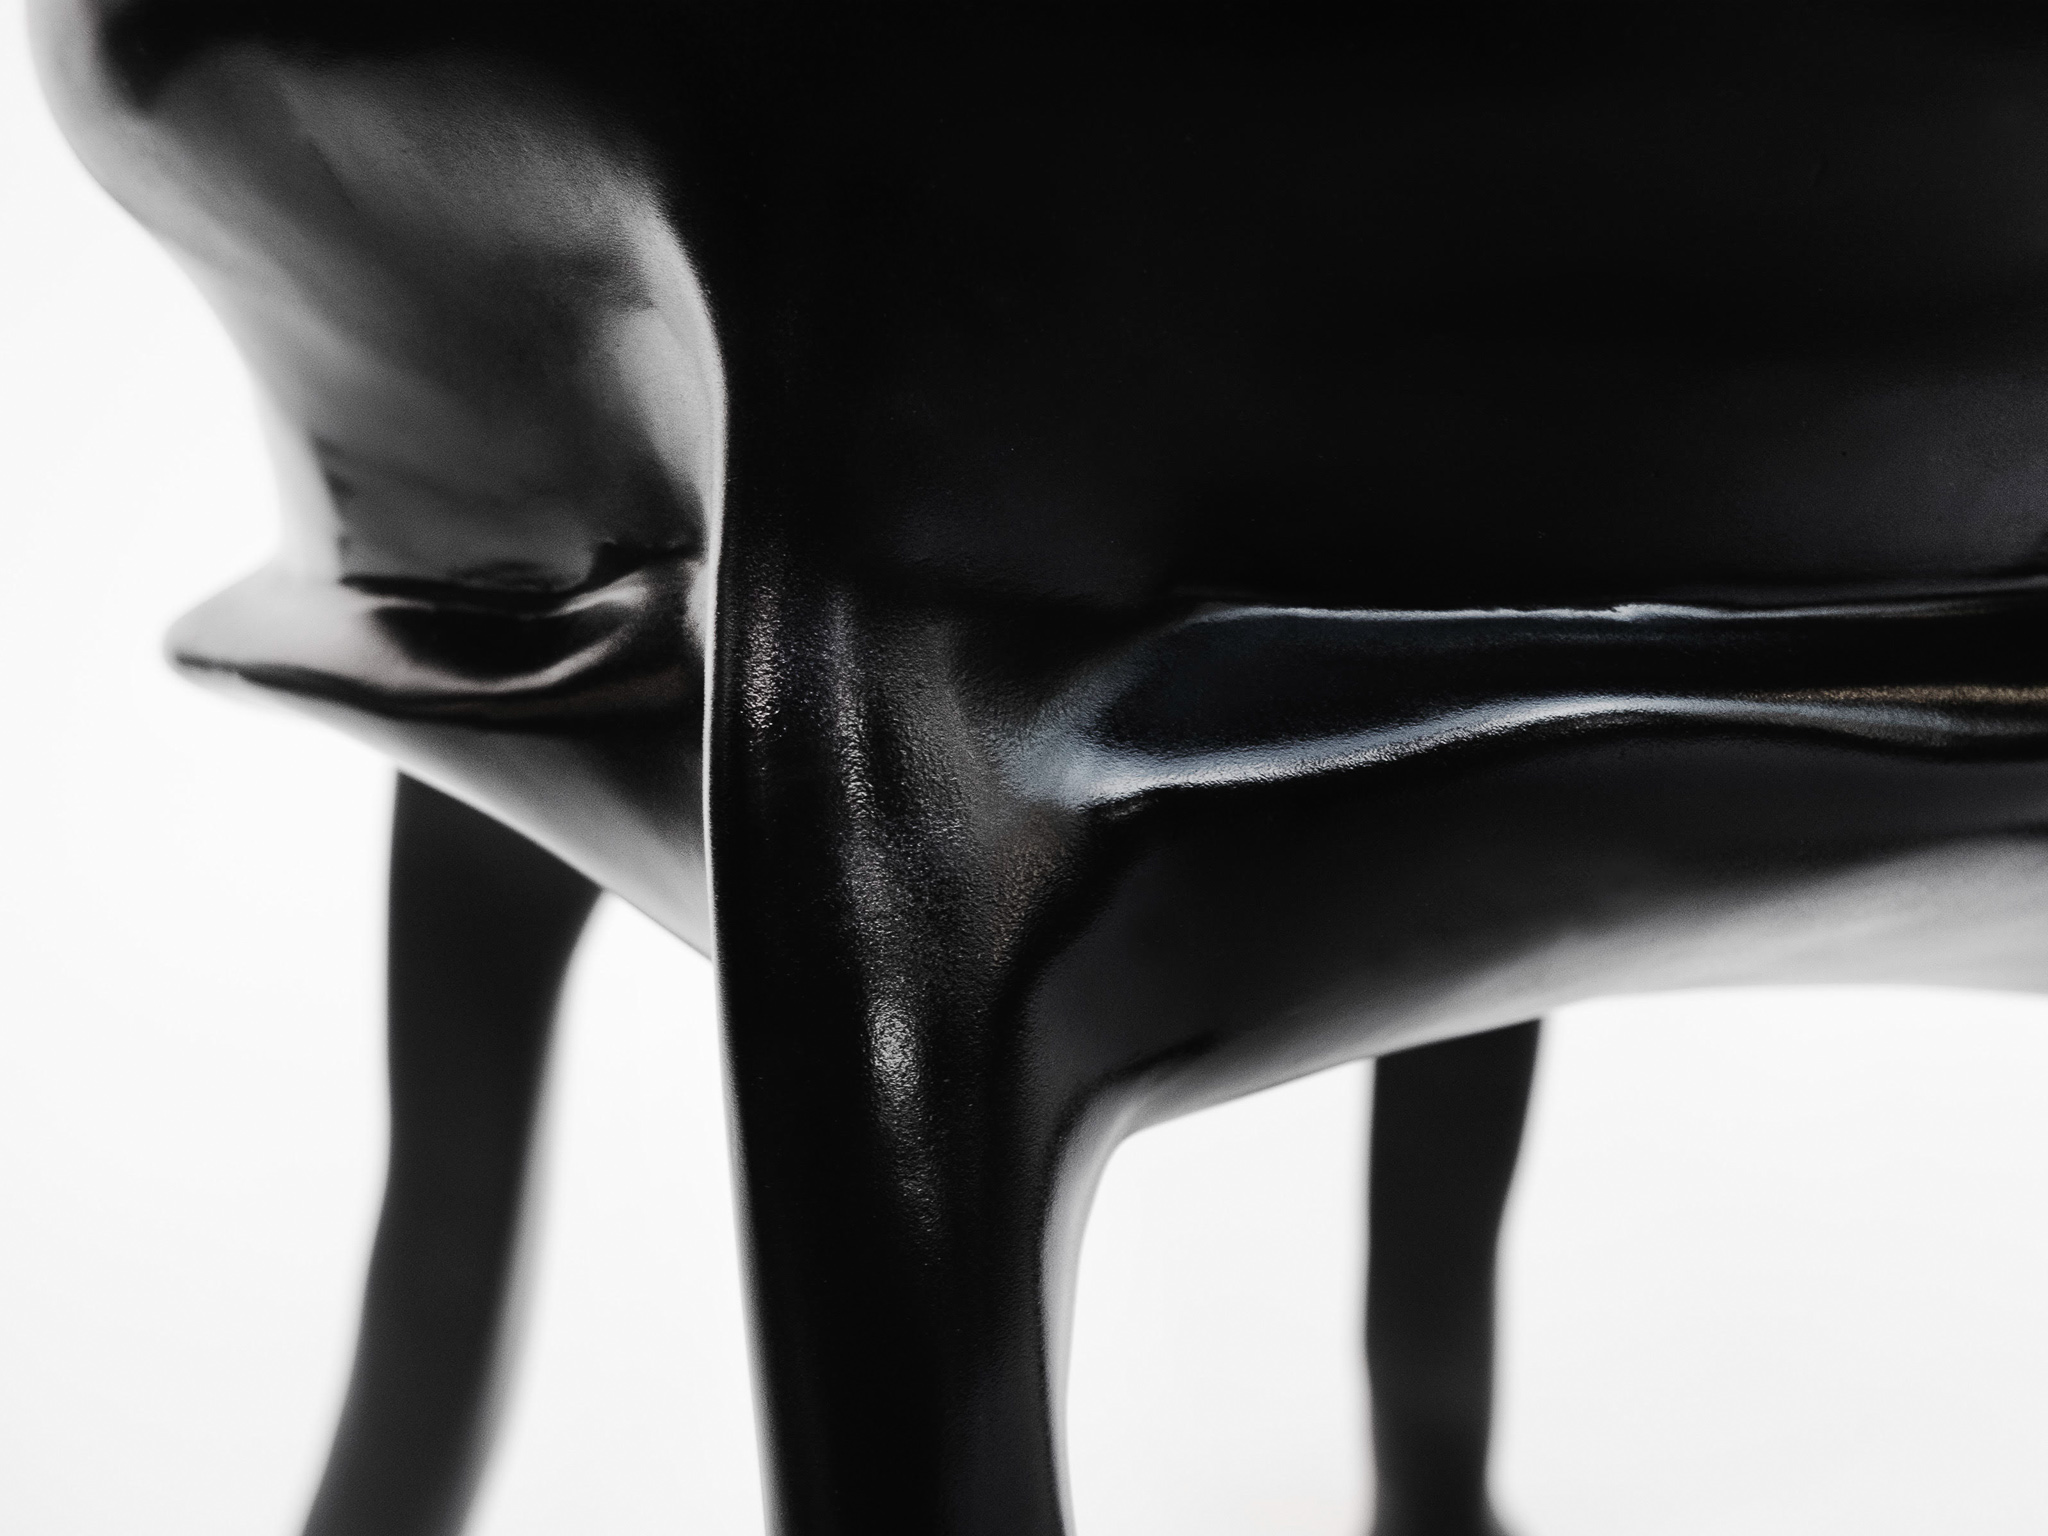 close-up photo of the surface texture of the chair. Black, glossy and the slightest bit grainy.